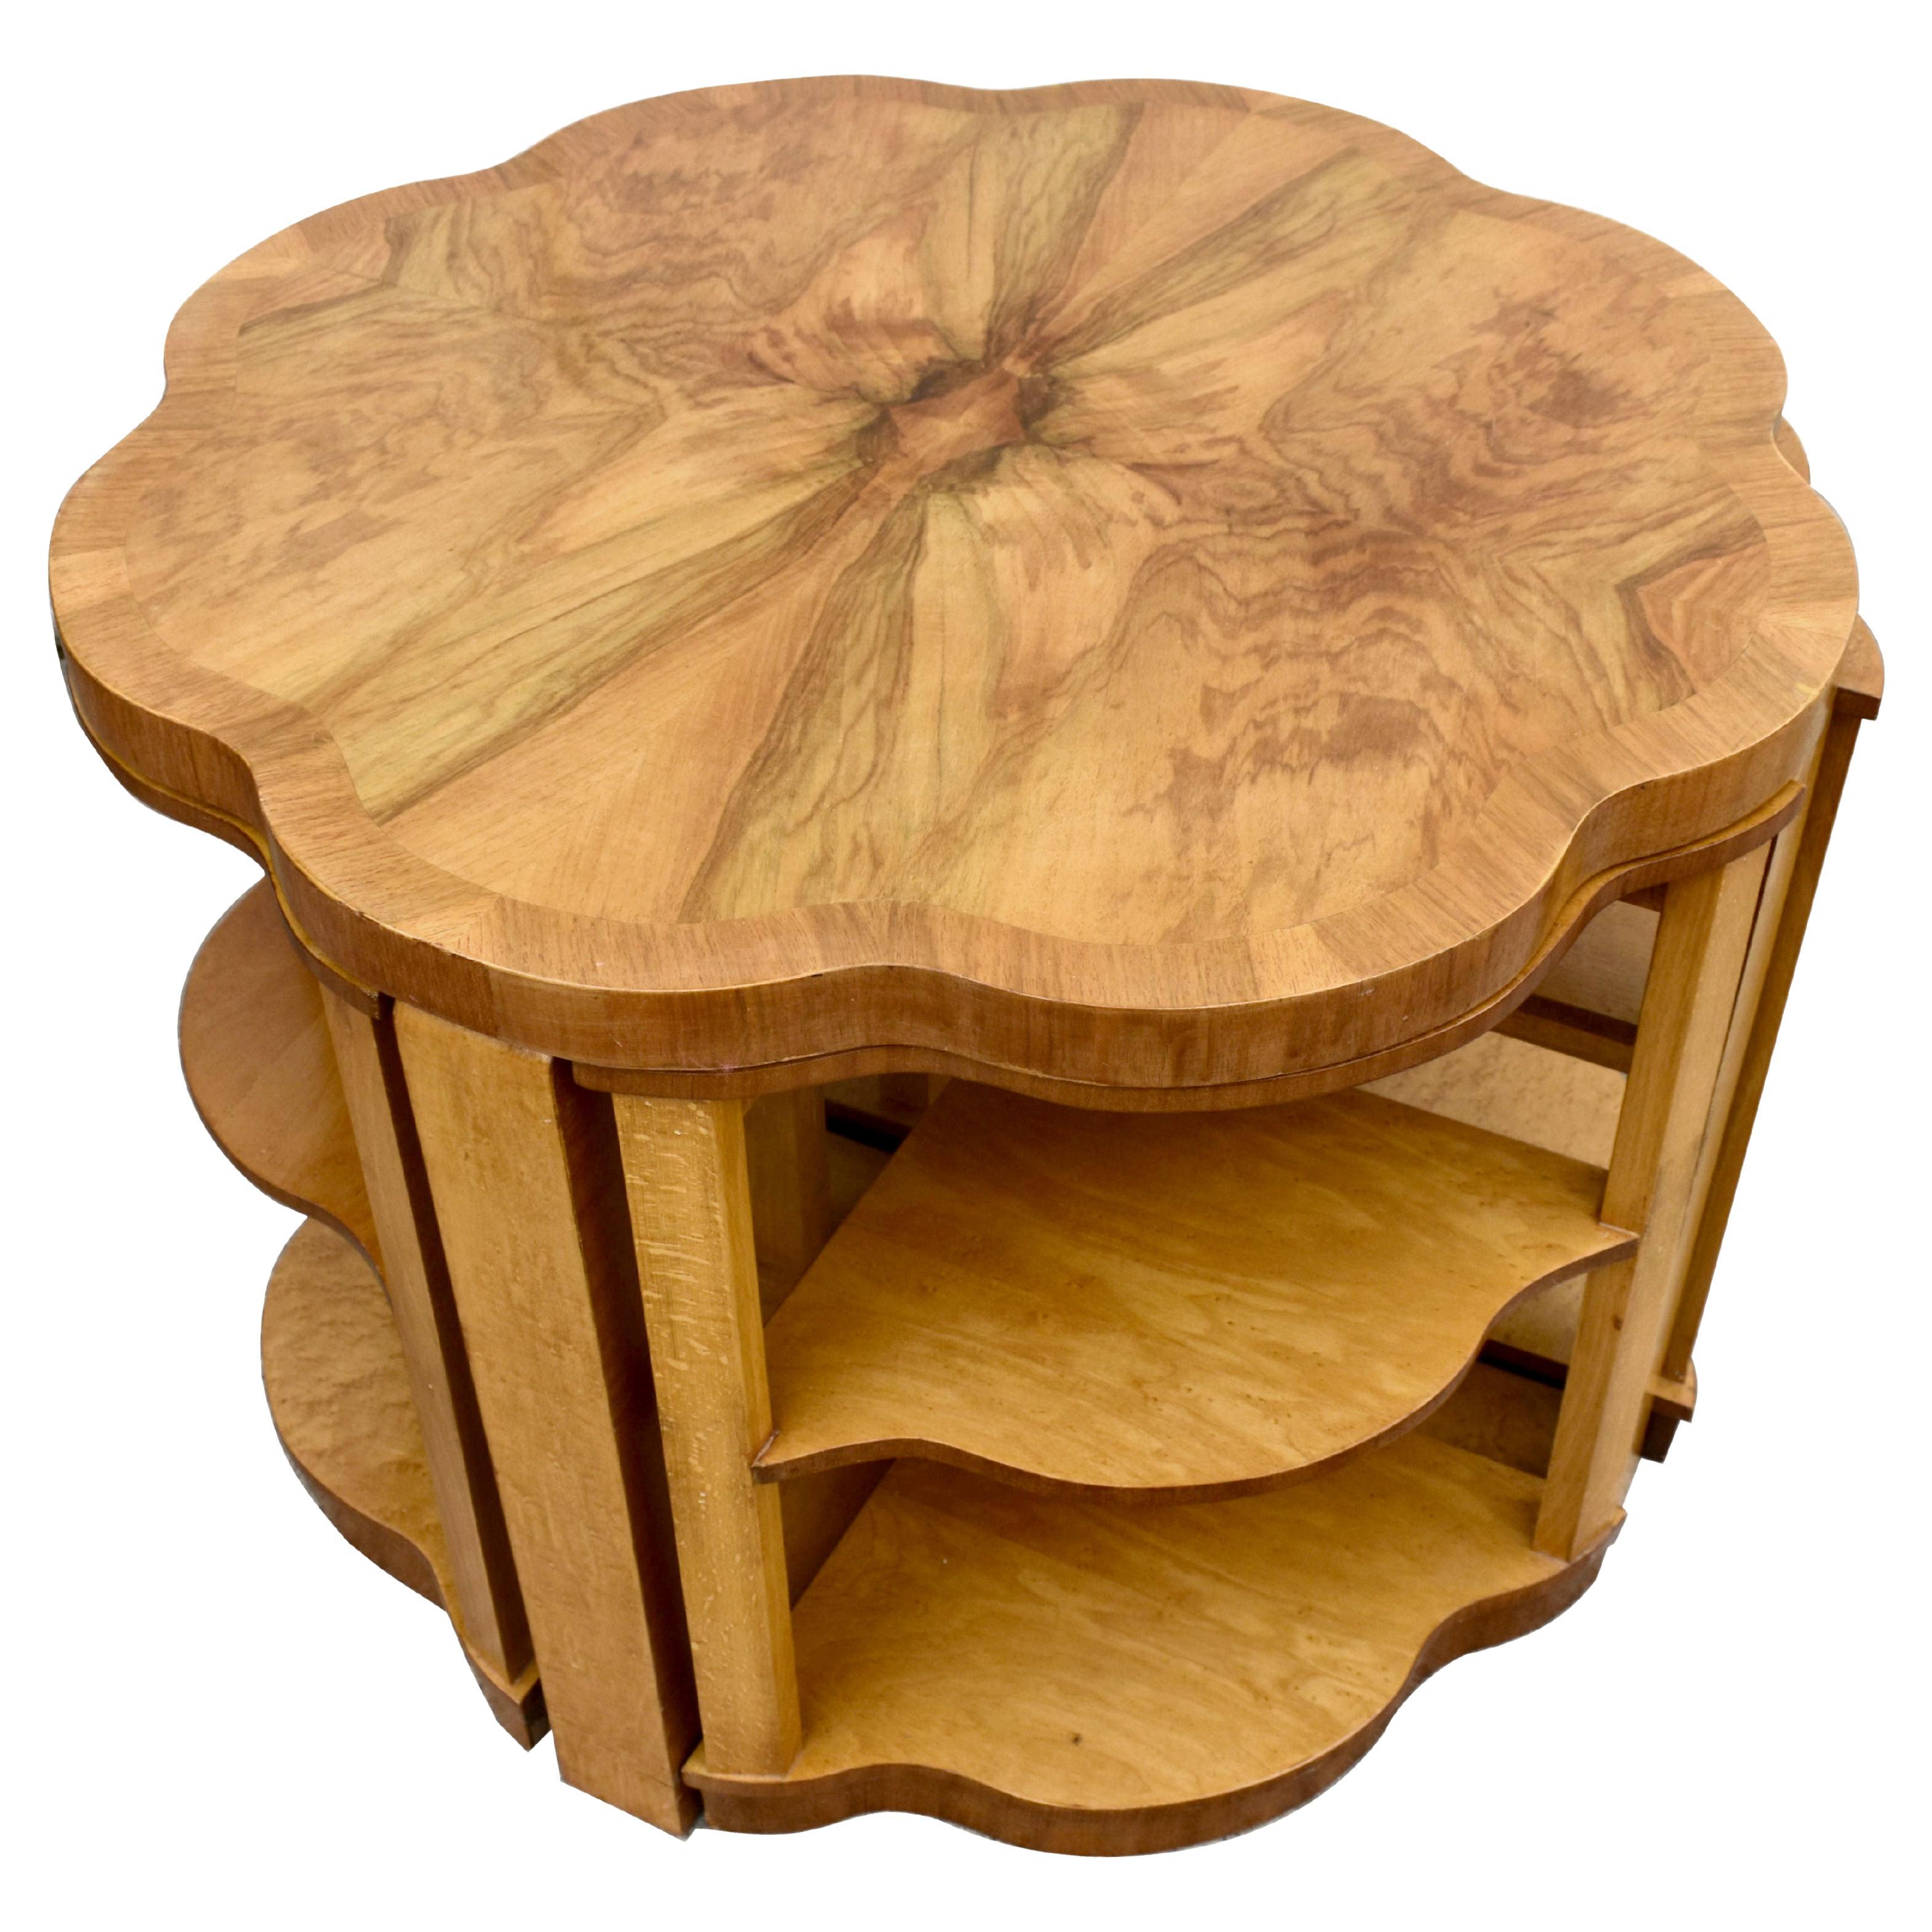 Art Deco High Quality Walnut & Maple Nest of 5 Tables by Epstein, English, 1930 For Sale